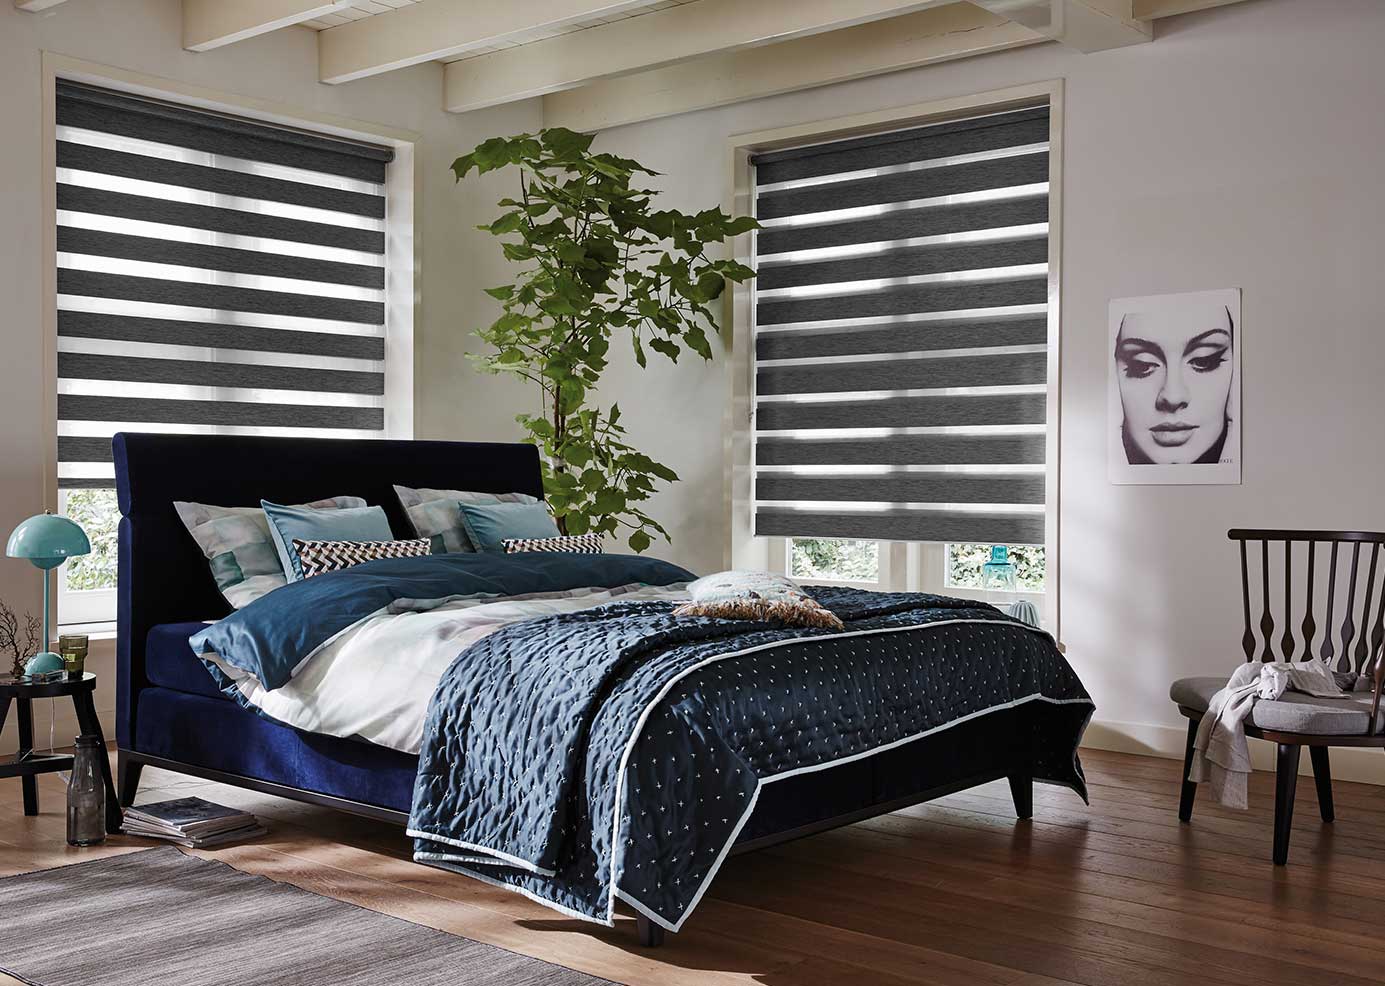 Translucent Dual Shade Blinds